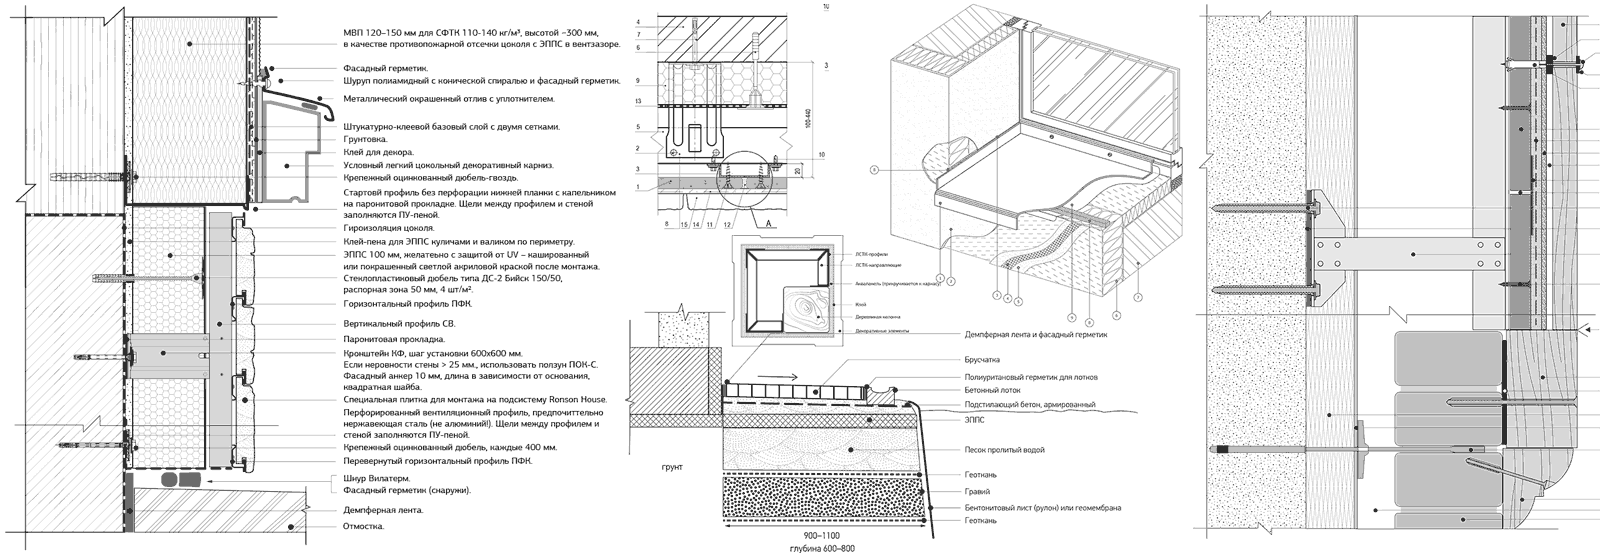 Examples of sheets with drawings and instructions for finishing facades